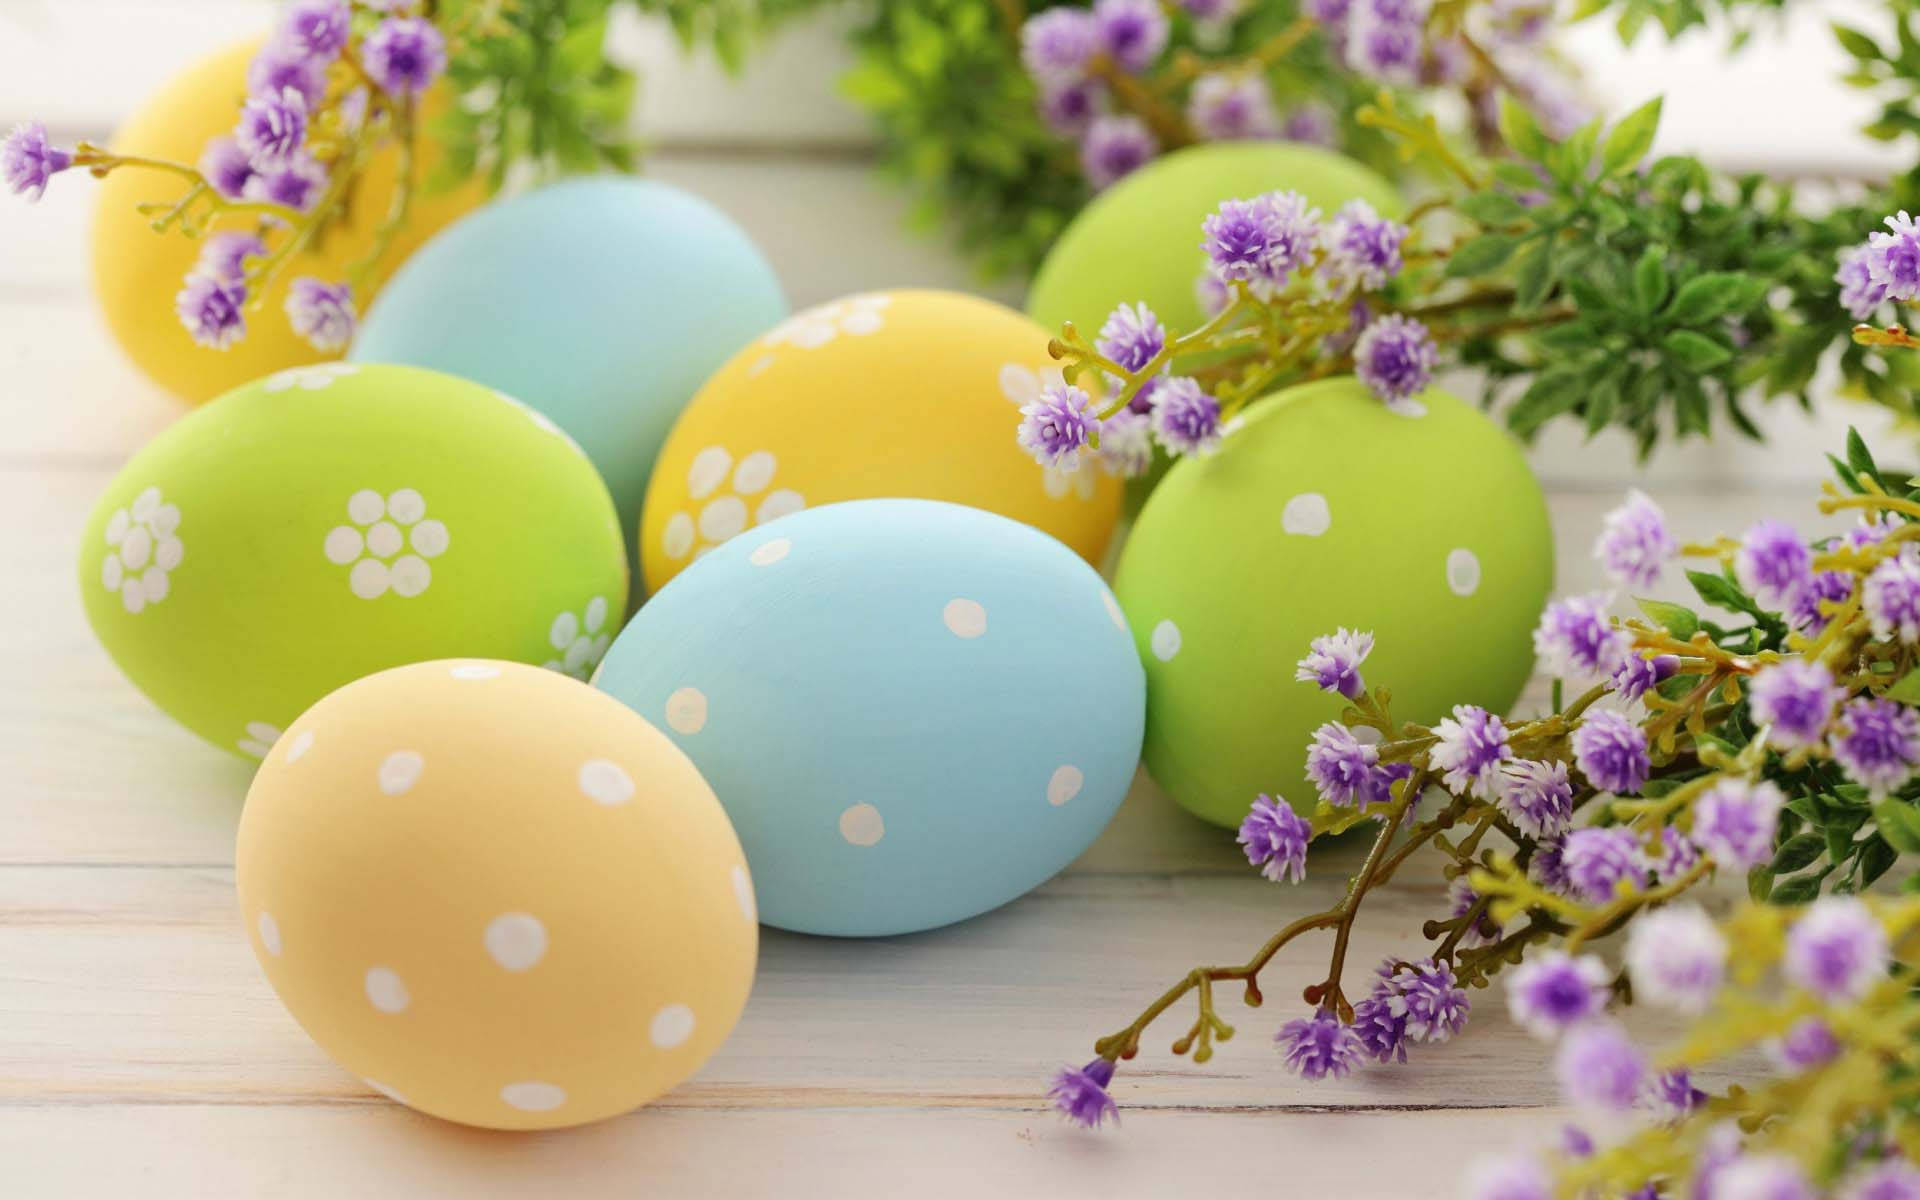 Celebrate The Easter Season With Beautiful Purple Flowers And Festive Eggs! Background